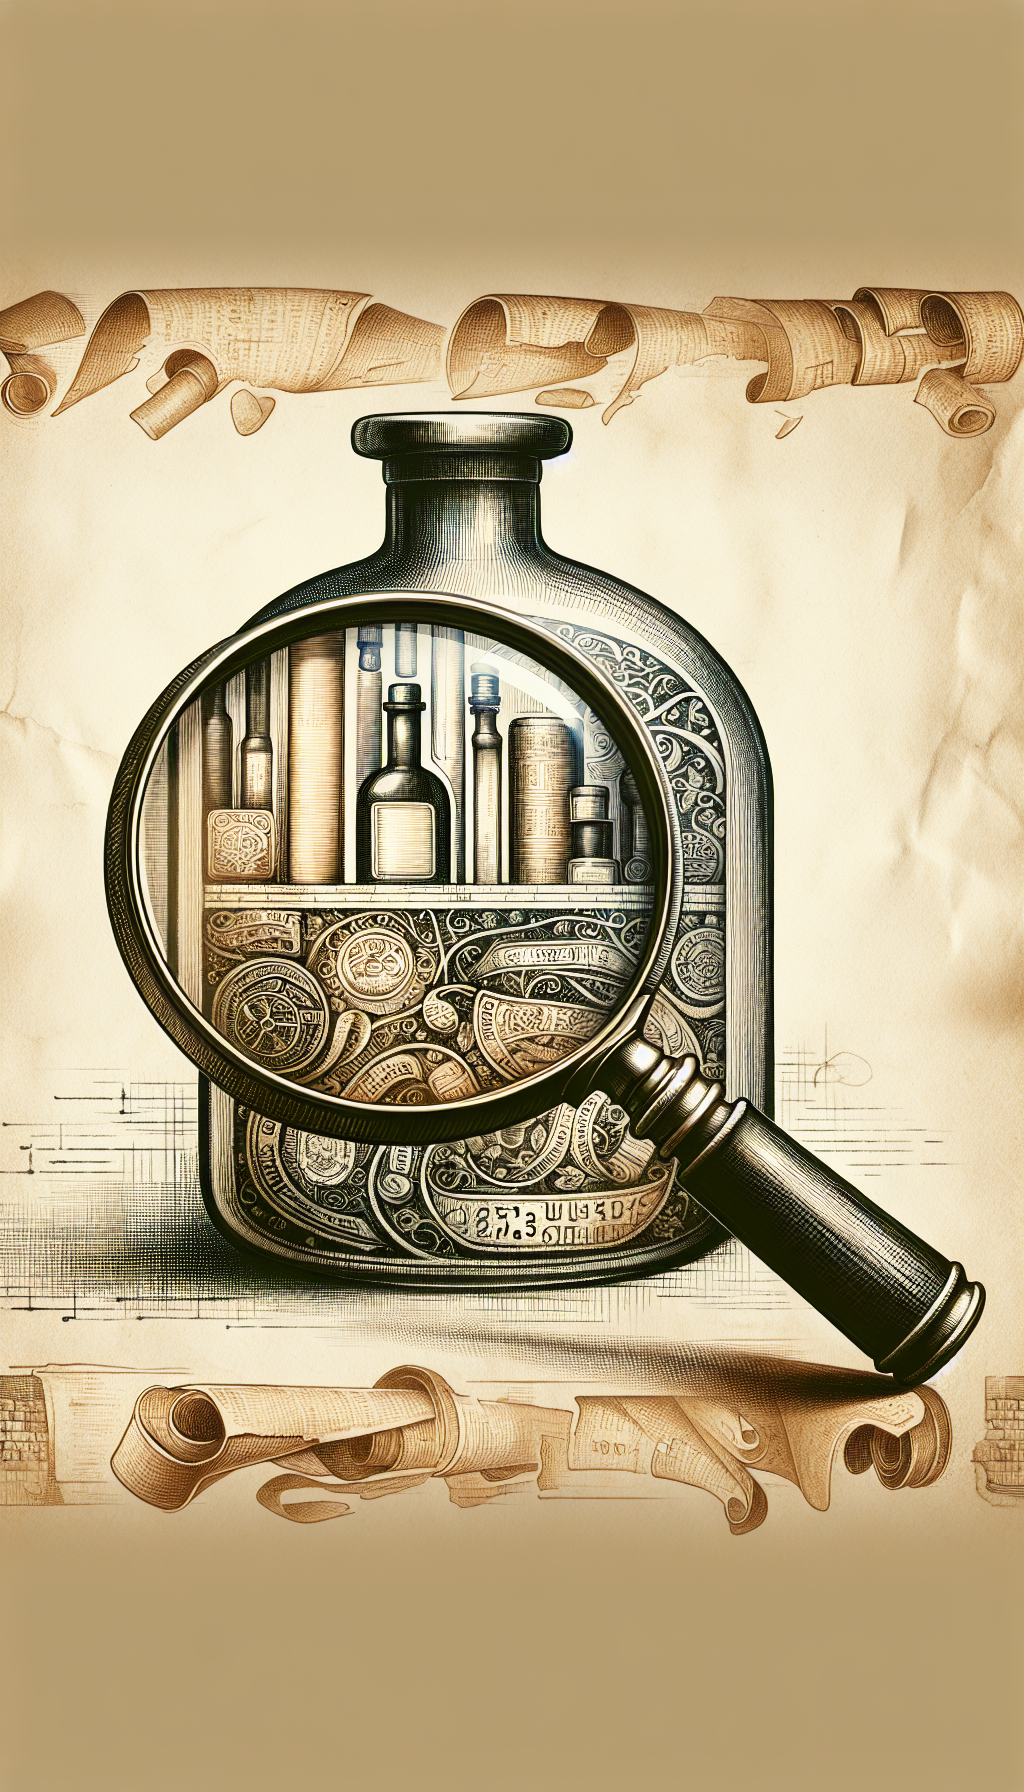 An illustration displays a vintage magnifying glass revealing layers beneath an antiquated glass bottle's bottom, with faded maker's marks and bottle stamps coming into sharp focus against a backdrop of historical scrolls and artifacts. The magnifying glass acts as a window to the past, with each layer artistically transitioning from sepia toned sketches to vibrant watercolor details, symbolizing the uncovering of the bottle's storied history.